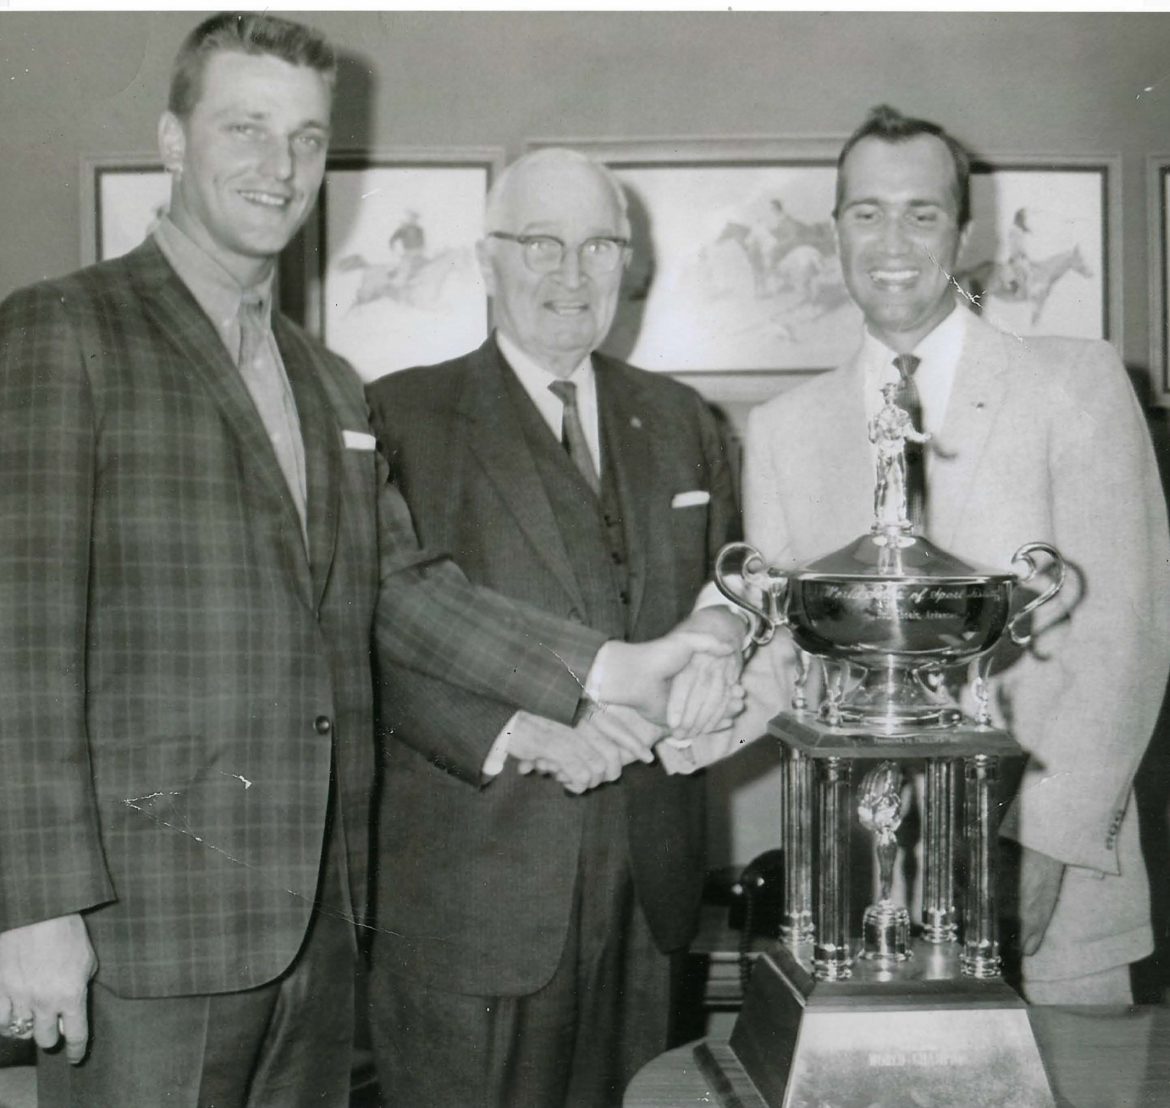 Ken White (right) was congratulated by former President Harry Truman and baseball legend Roger Maris after winning the World Series of Freshwater Fishing in 1963.